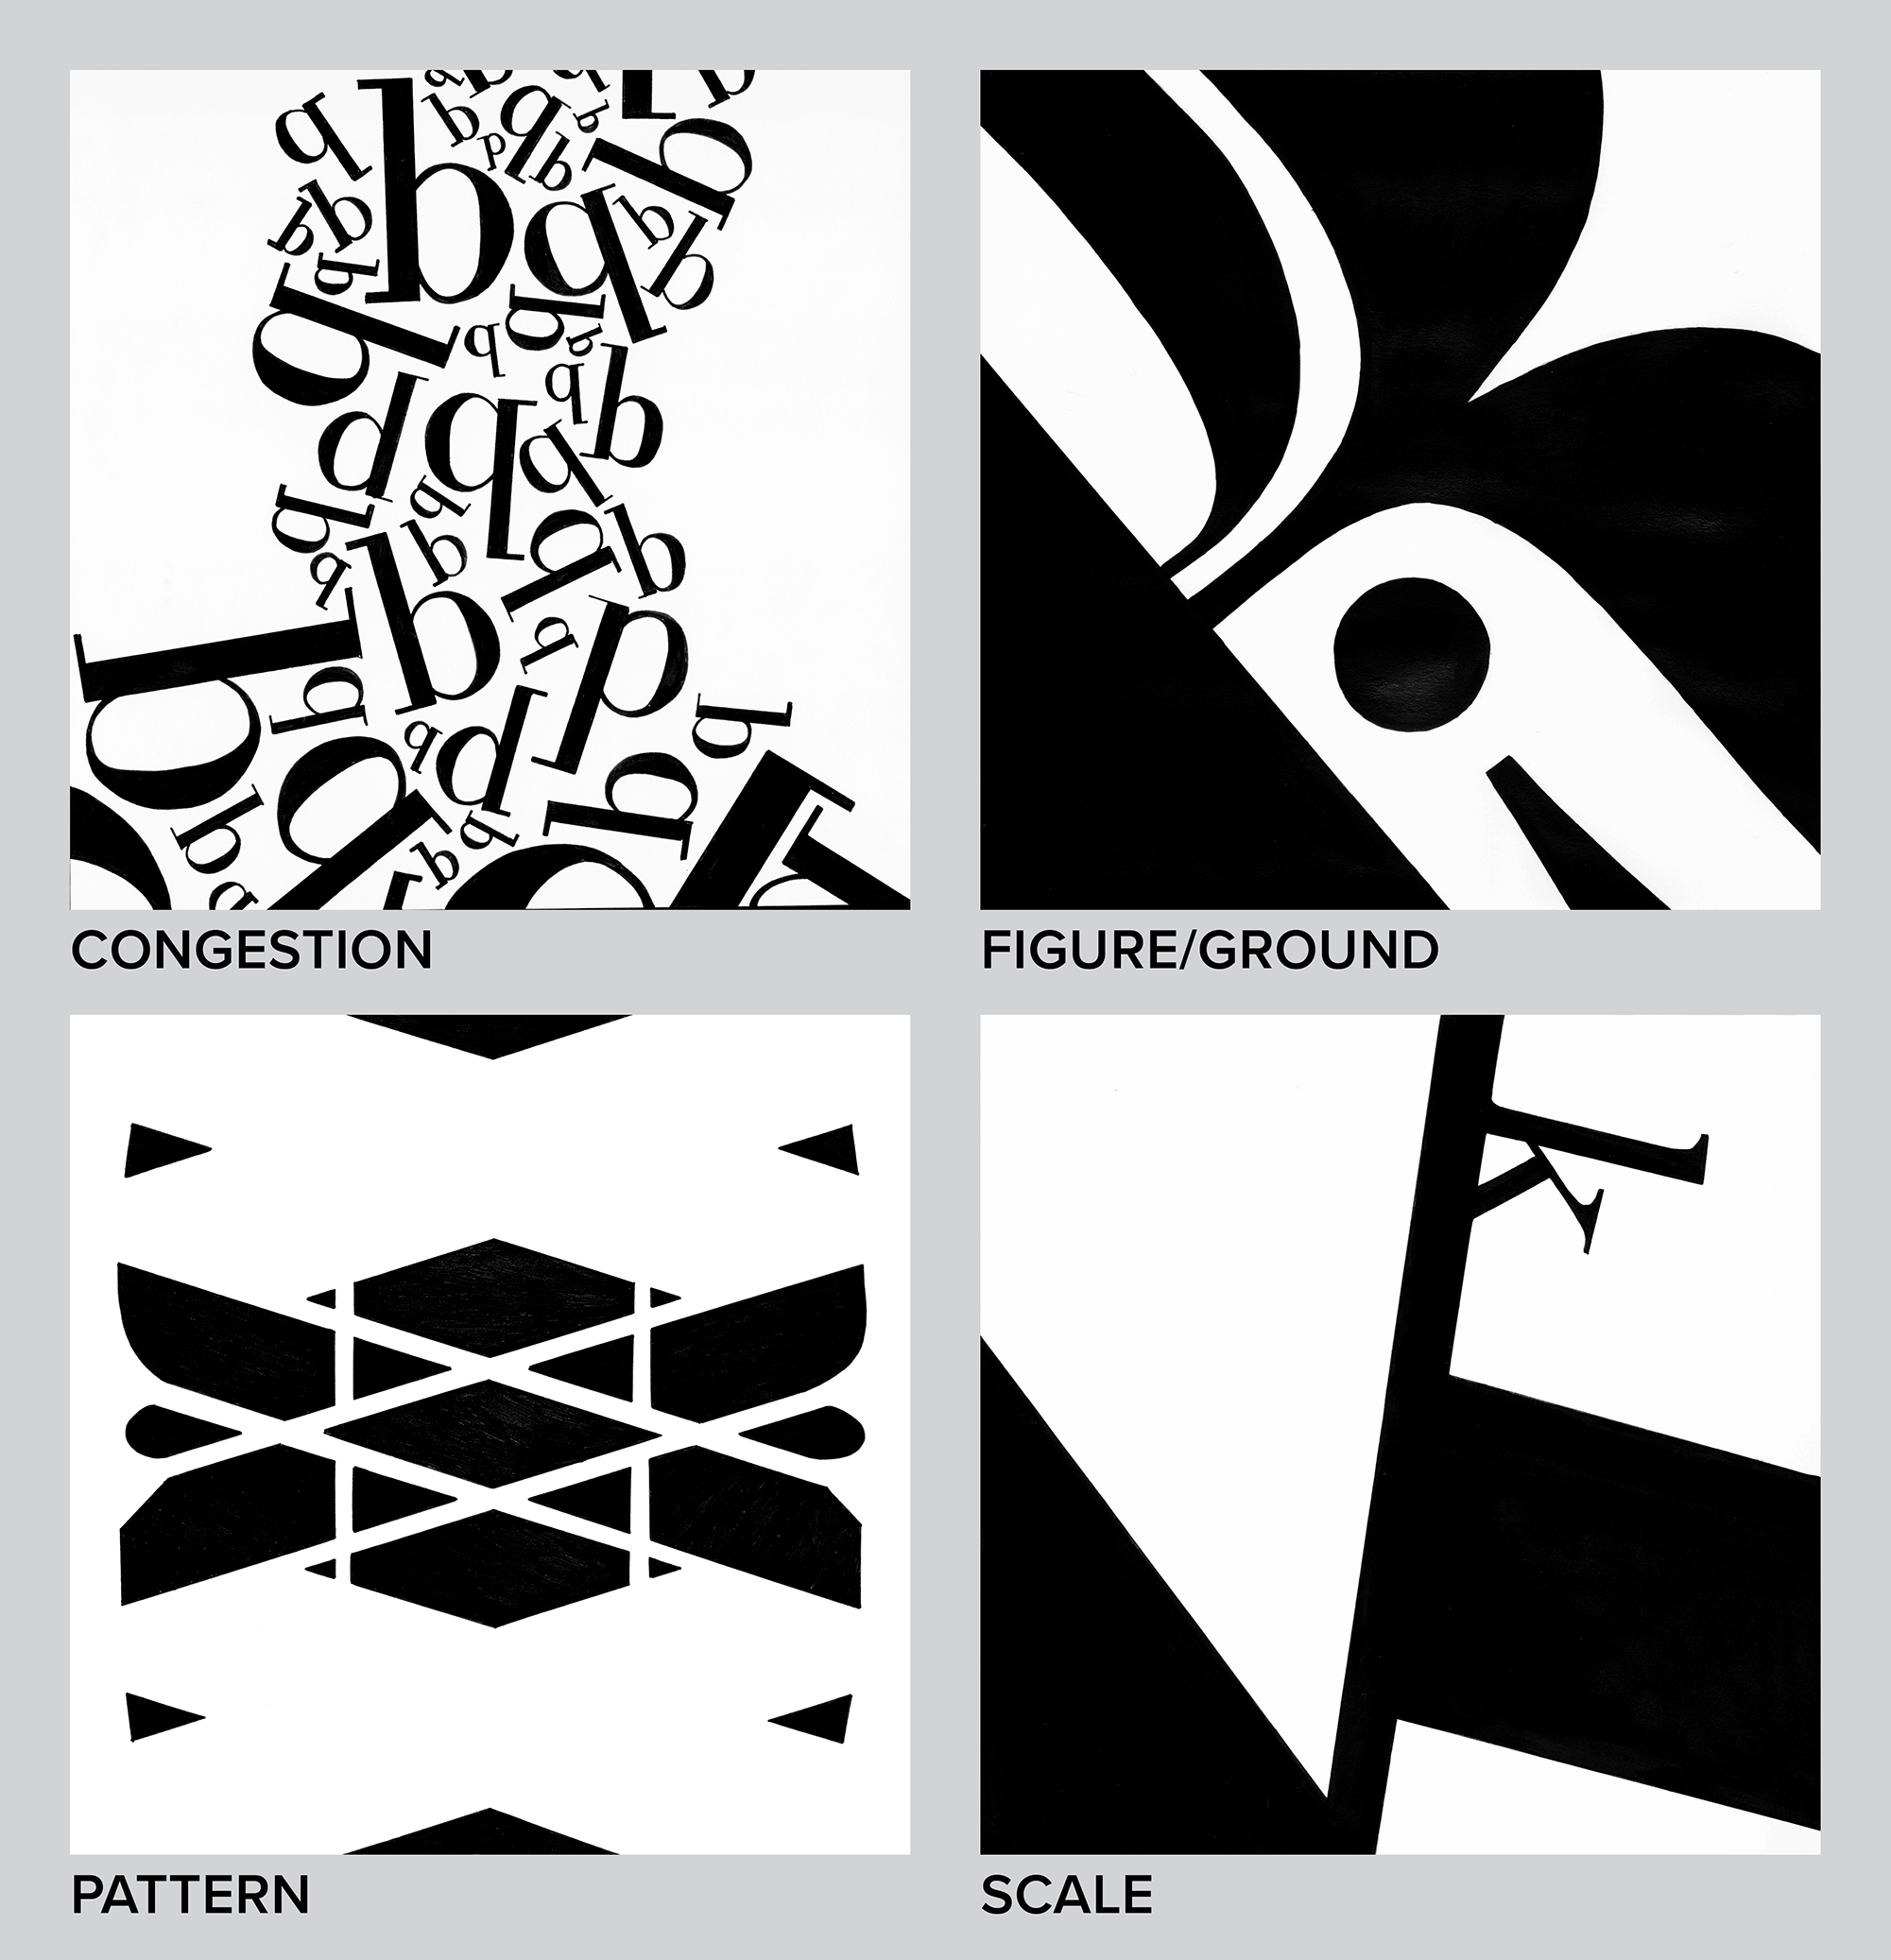 Basic Type Compositions by Tory Cunningham